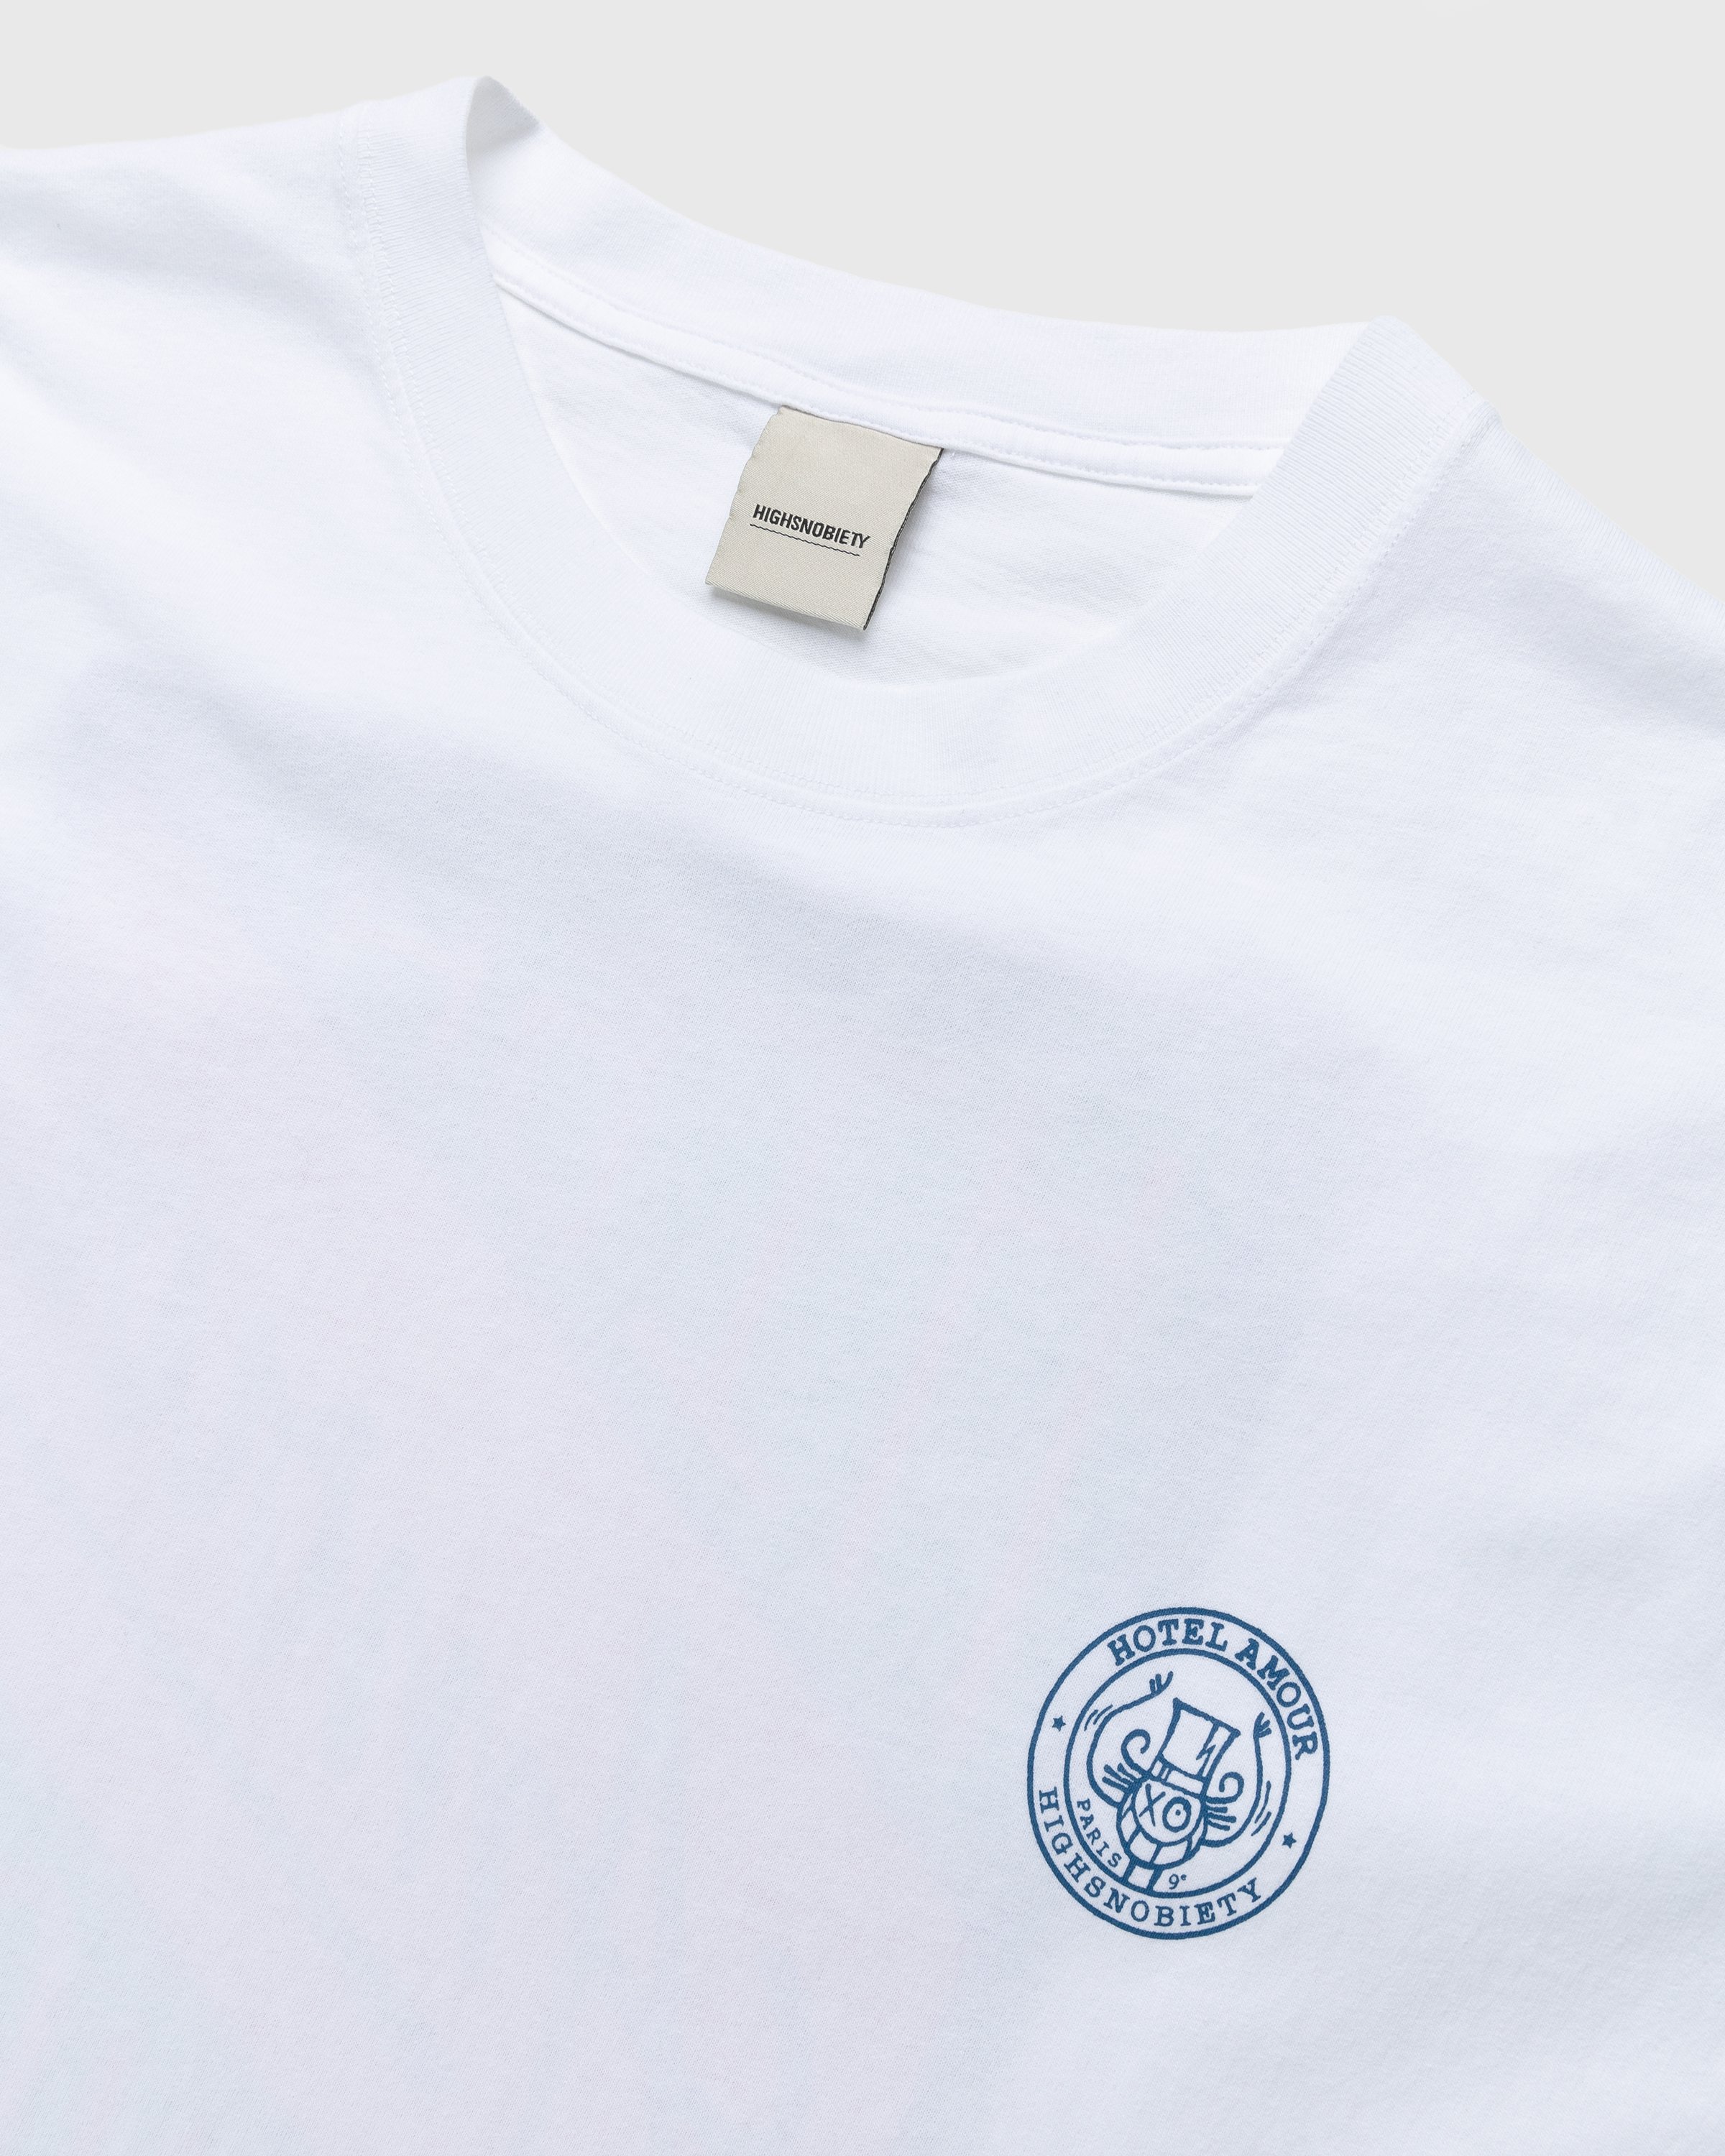 Hotel Amour x Highsnobiety - Not In Paris 4 T-Shirt White - Clothing - White - Image 5